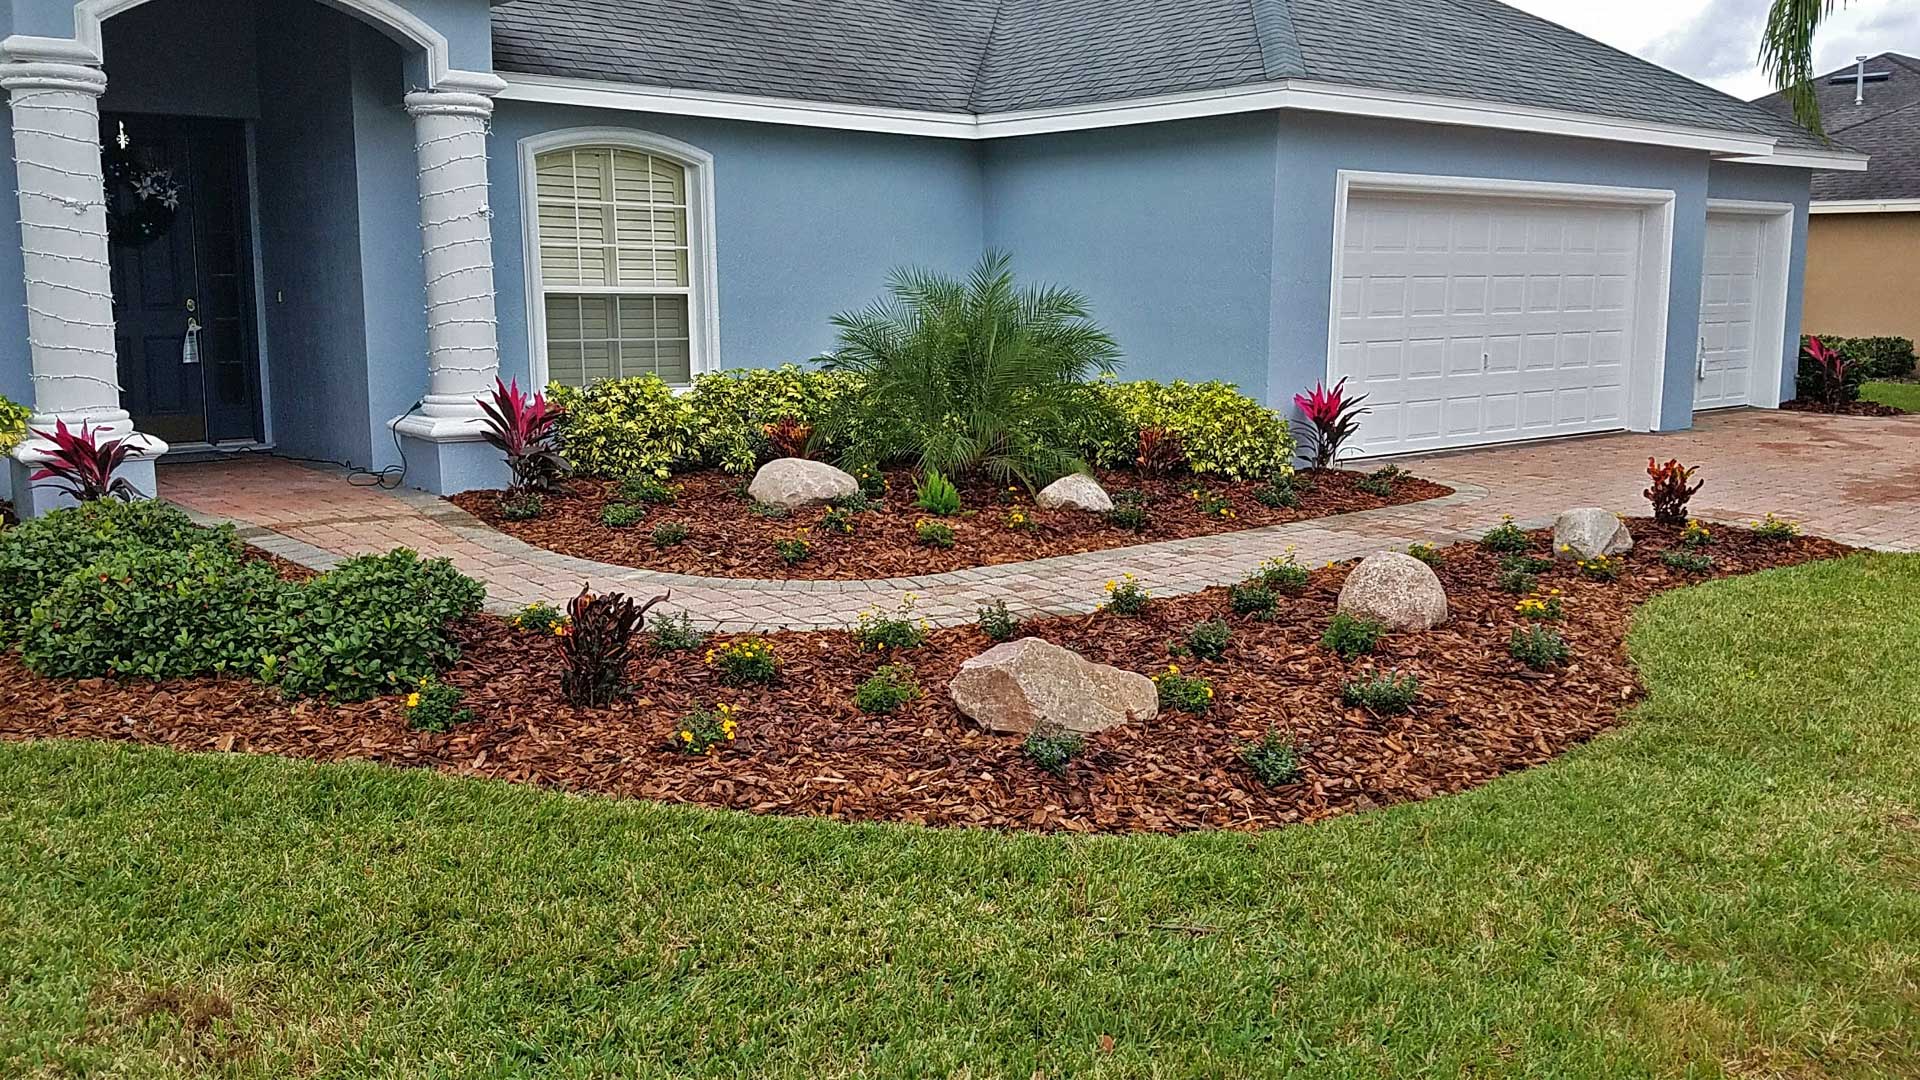 New landscaping at a residential property in Lakeland, FL.